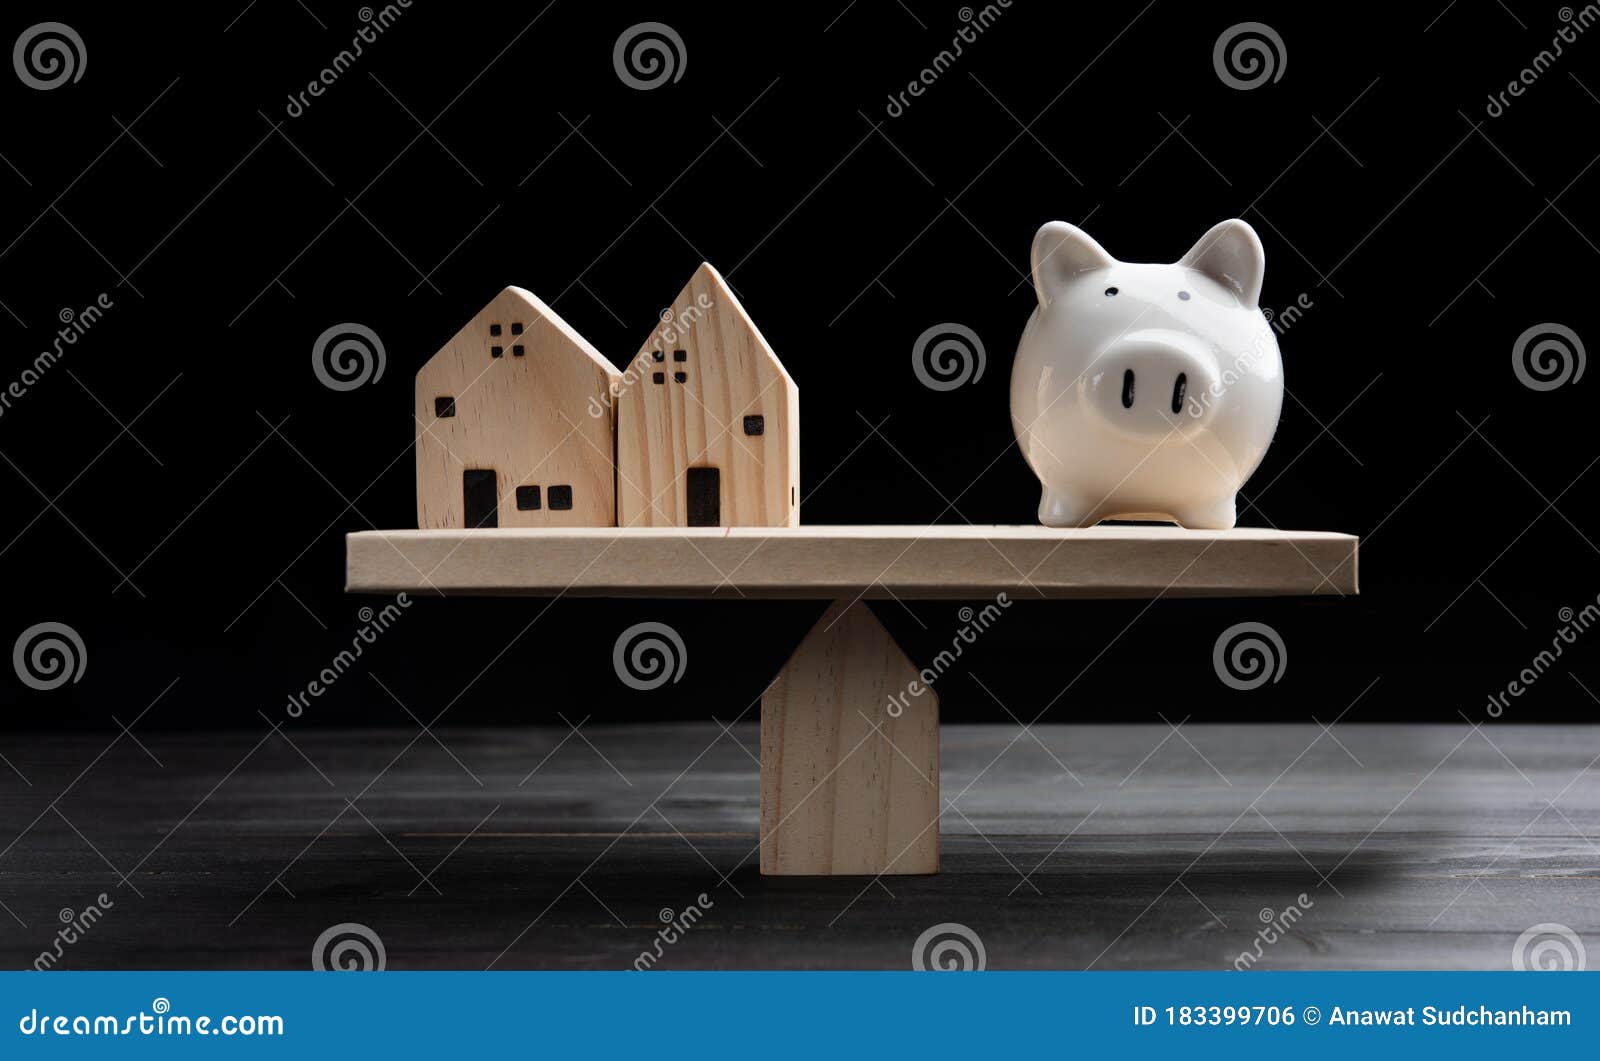 home loans market. model house and piggy bank balancing on a seesaw